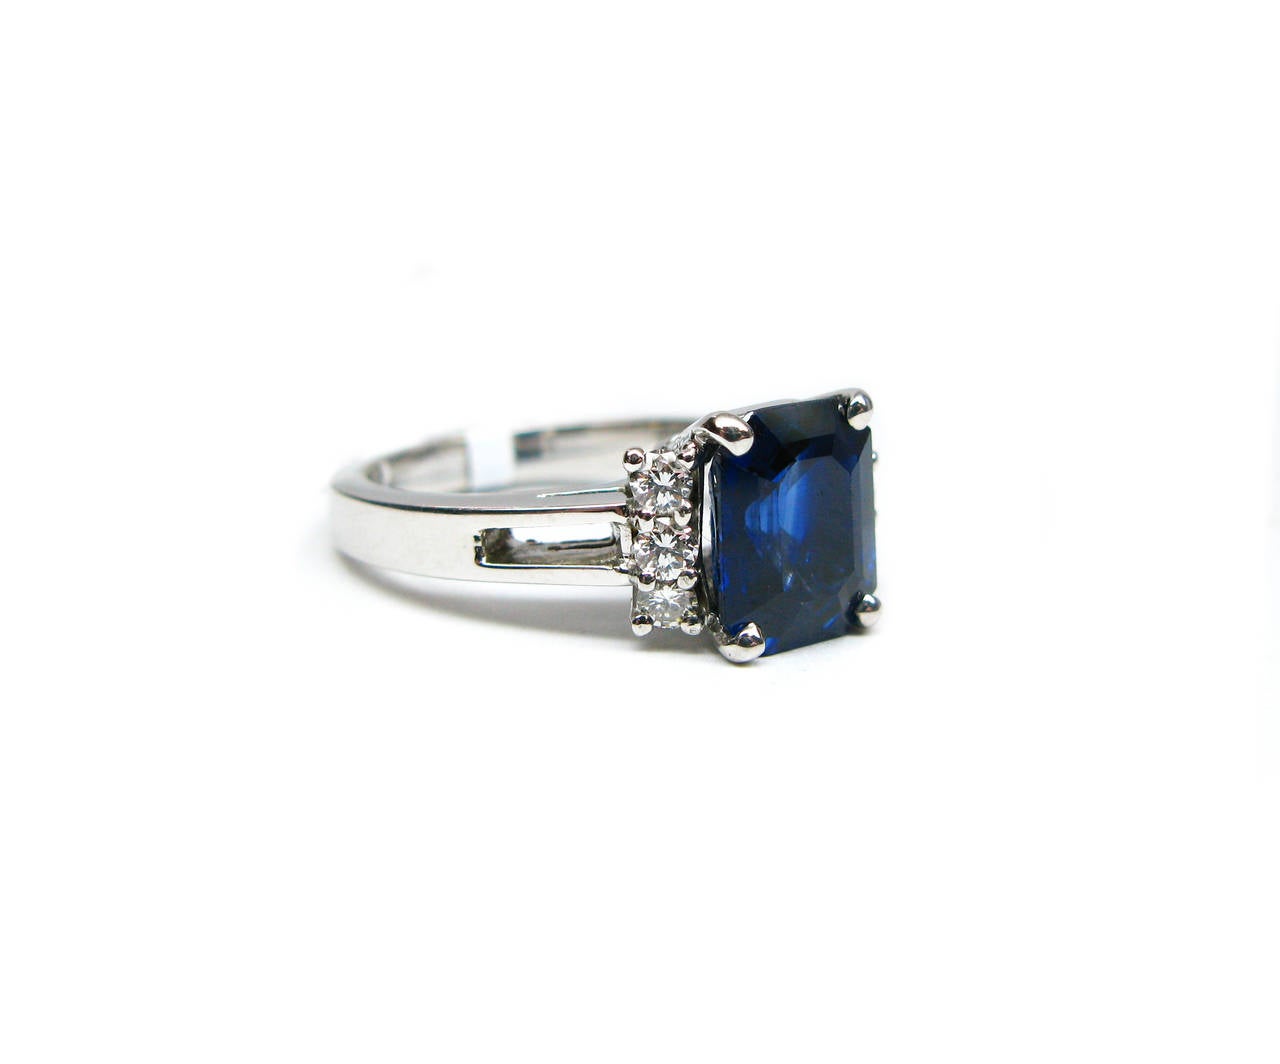 This classic ring is part of the Kurt Wayne collection. This 18kt gold ring features  a 3.15ct rectangular step cut deep blue sapphire center with six round brilliant diamond sidestones weighing 0.24ctw. The perfect addition to your collection!